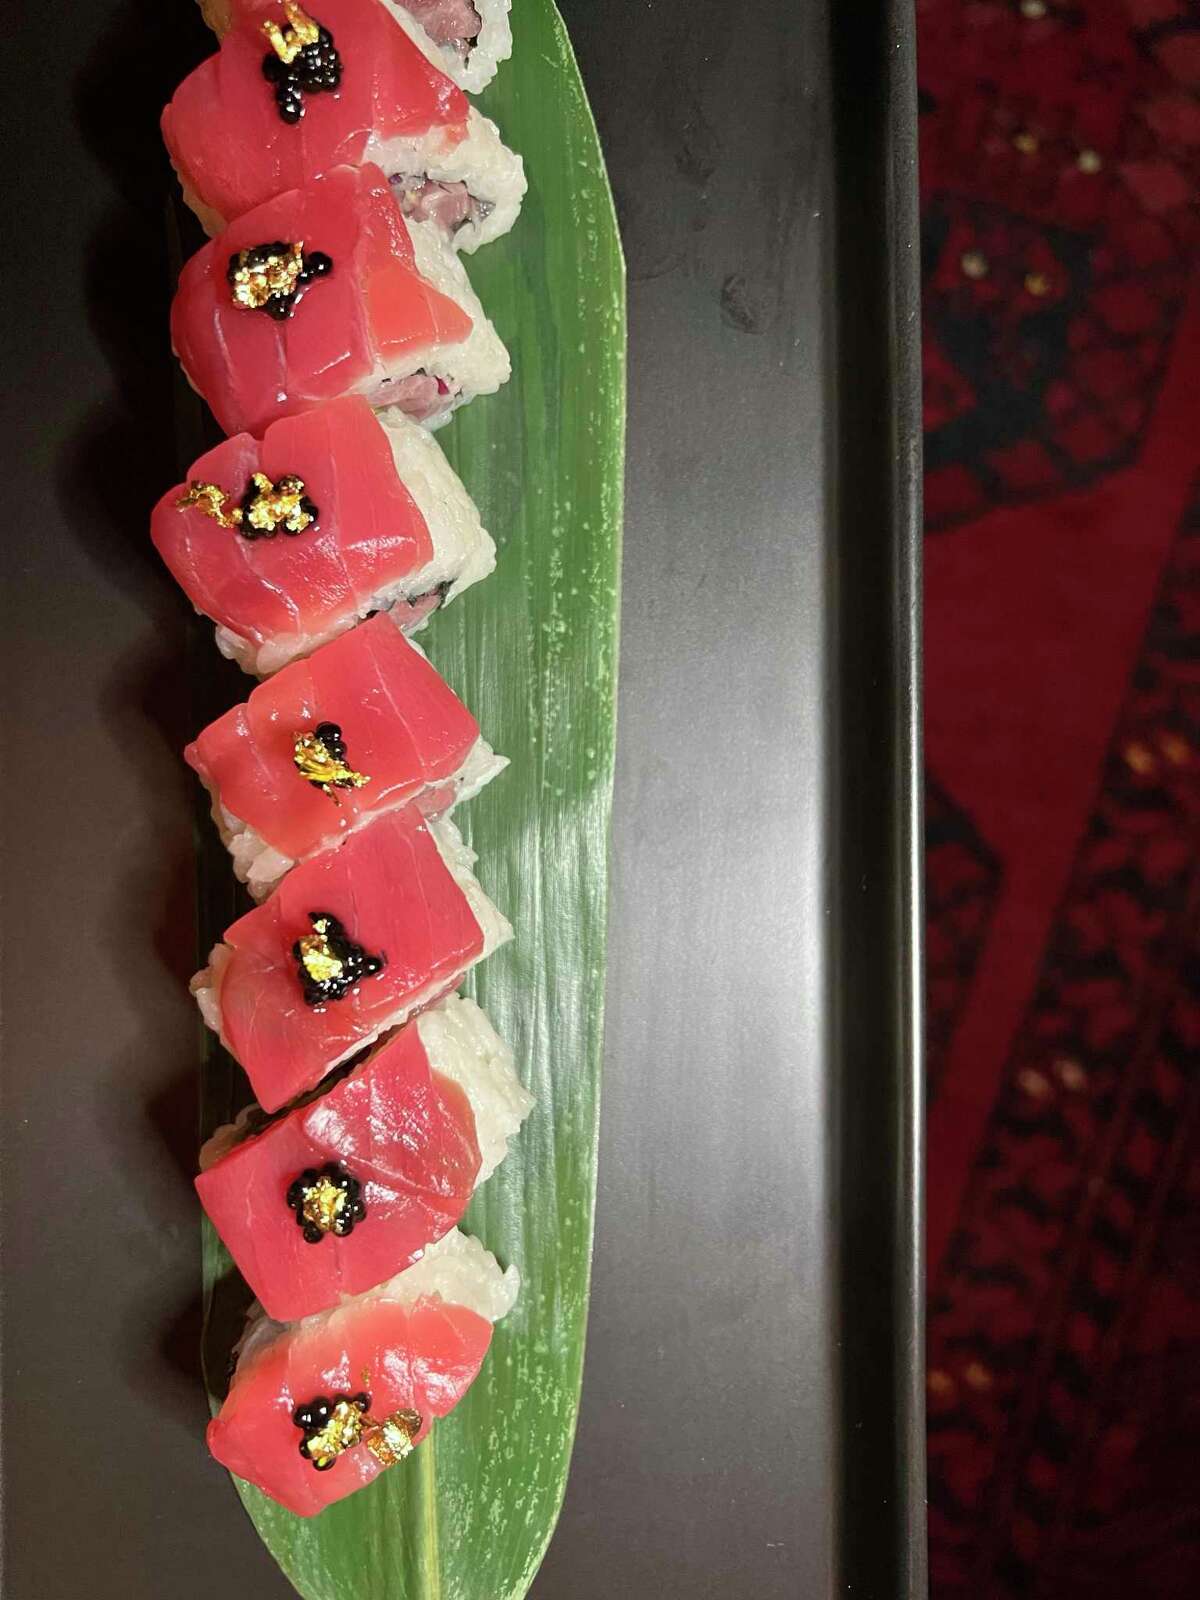 Sushi options include the Up Scale Roll with toro tuna, asparagus, caviar and gold flakes at Up Scale, a new Southtown restaurant from the owners of Little Em’s Oyster Bar.